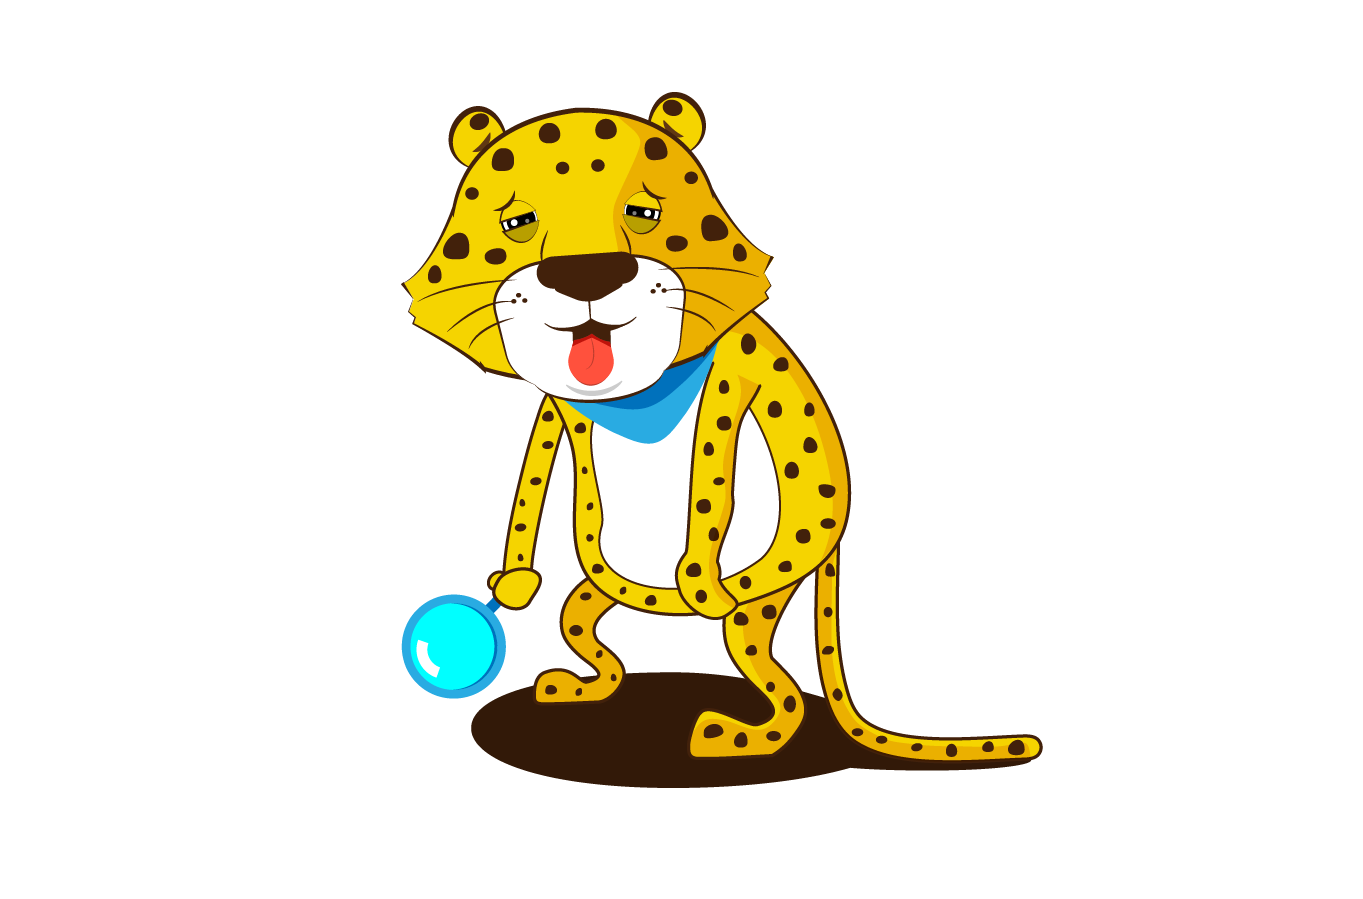 Free Leopard Cartoon, Download Free Leopard Cartoon png images, Free ...